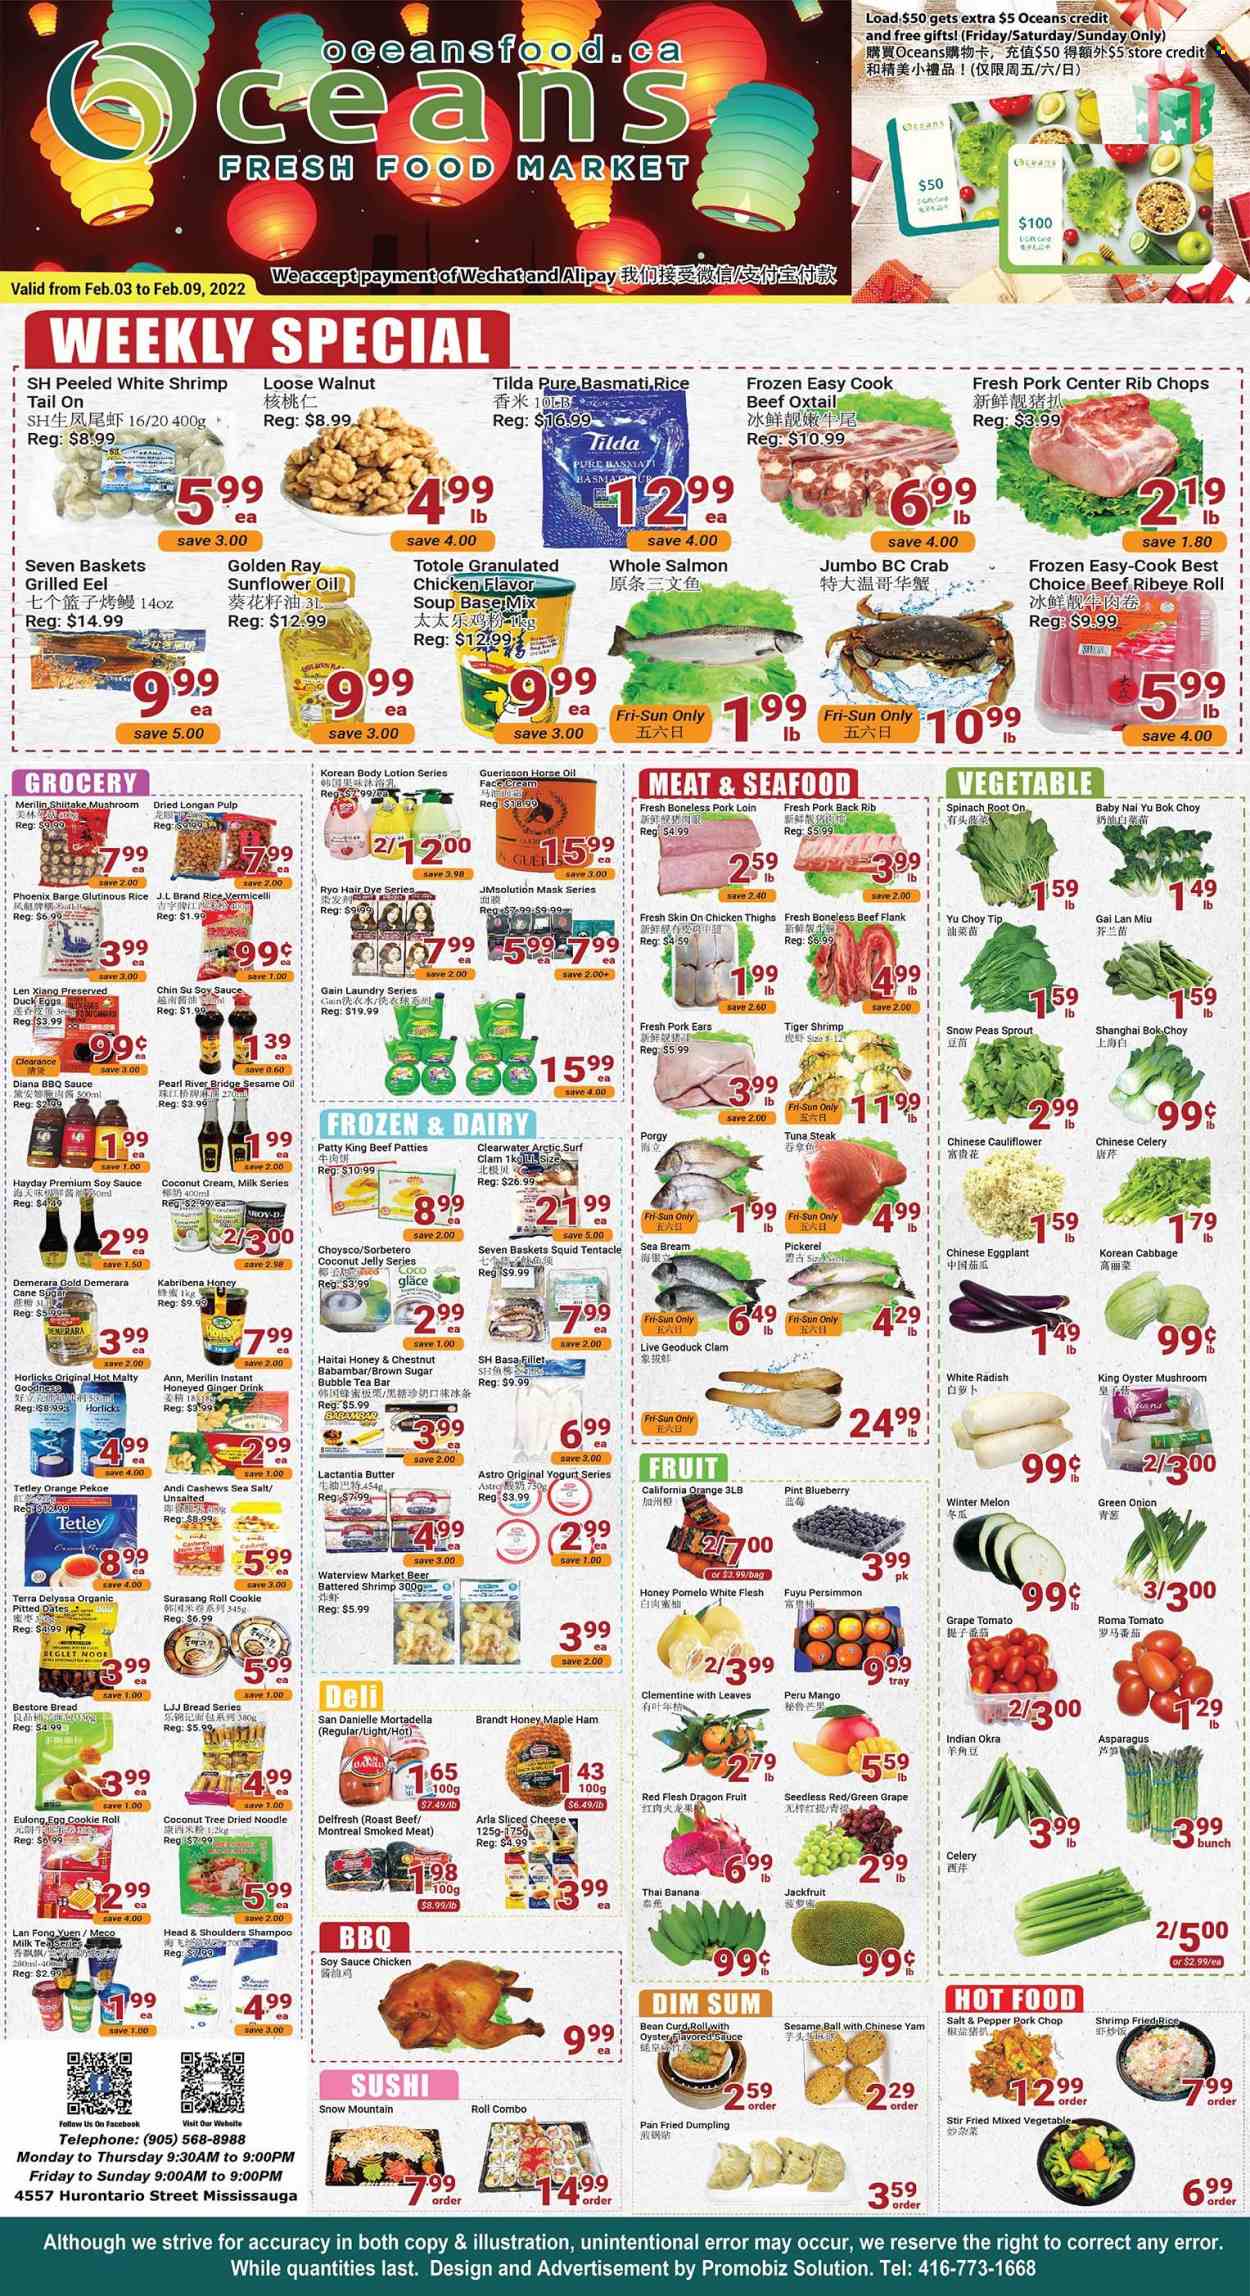 thumbnail - Oceans Flyer - February 03, 2023 - February 09, 2023 - Sales products - oyster mushrooms, mushrooms, bread, asparagus, bok choy, cabbage, cauliflower, celery, ginger, radishes, spinach, tomatoes, peas, okra, eggplant, white radish, green onion, persimmons, oranges, melons, pomelo, dragon fruit, clams, eel, salmon, squid, tuna, oysters, seafood, crab, seabream, shrimps, walleye, soup, sauce, dumplings, noodles, mortadella, ham, sliced cheese, cheese, curd, Arla, yoghurt, milk, Horlicks, butter, snow peas, mixed vegetables, jelly, cane sugar, demerara sugar, sea salt, tuna steak, basmati rice, rice vermicelli, BBQ sauce, soy sauce, sesame oil, sunflower oil, honey, cashews, dried fruit, dried dates, tea, bubble tea, beer, chicken thighs, chicken, beef meat, oxtail, roast beef, pork chops, pork loin, pork meat, rib chops, Gain, Surf, face cream, Head & Shoulders, body lotion, shampoo, steak. Page 1.